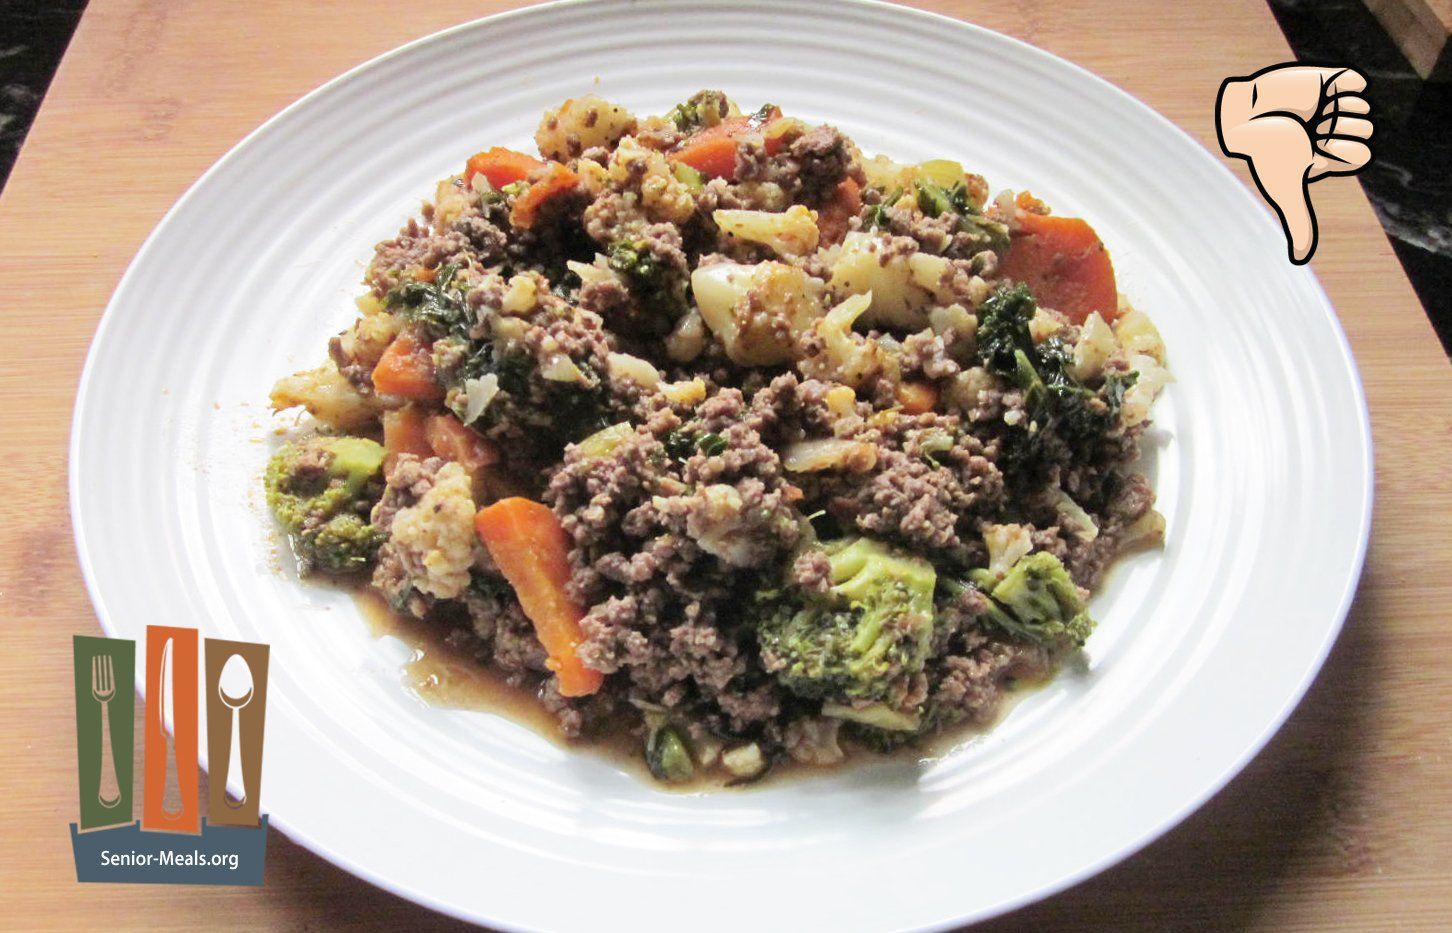 Ground Beef and Southwest Vegetables